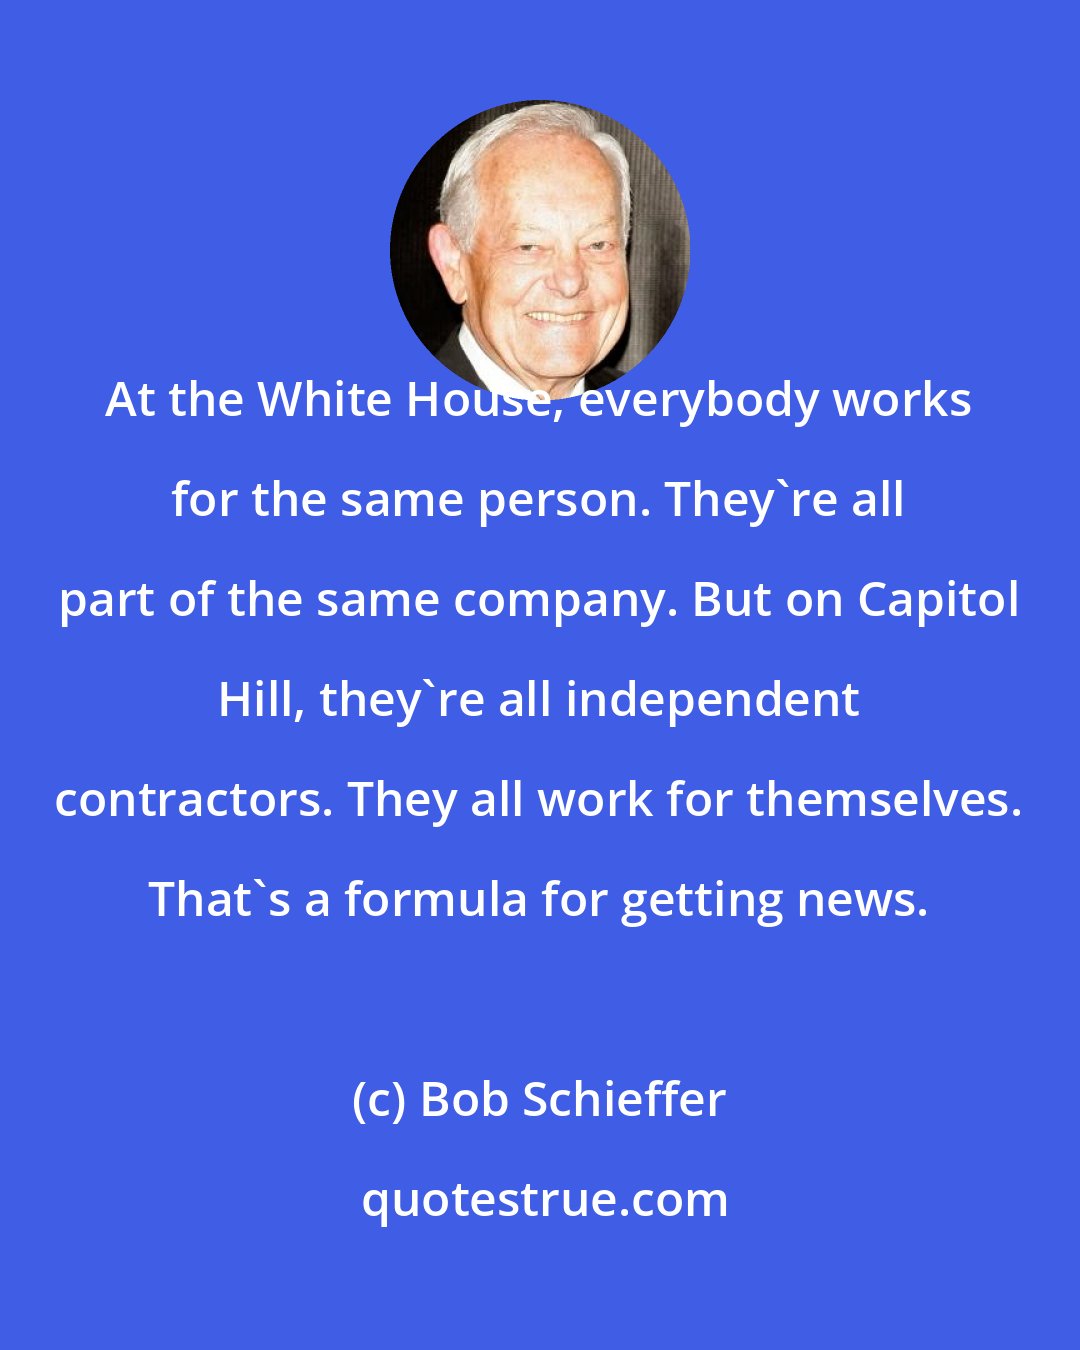 Bob Schieffer: At the White House, everybody works for the same person. They're all part of the same company. But on Capitol Hill, they're all independent contractors. They all work for themselves. That's a formula for getting news.